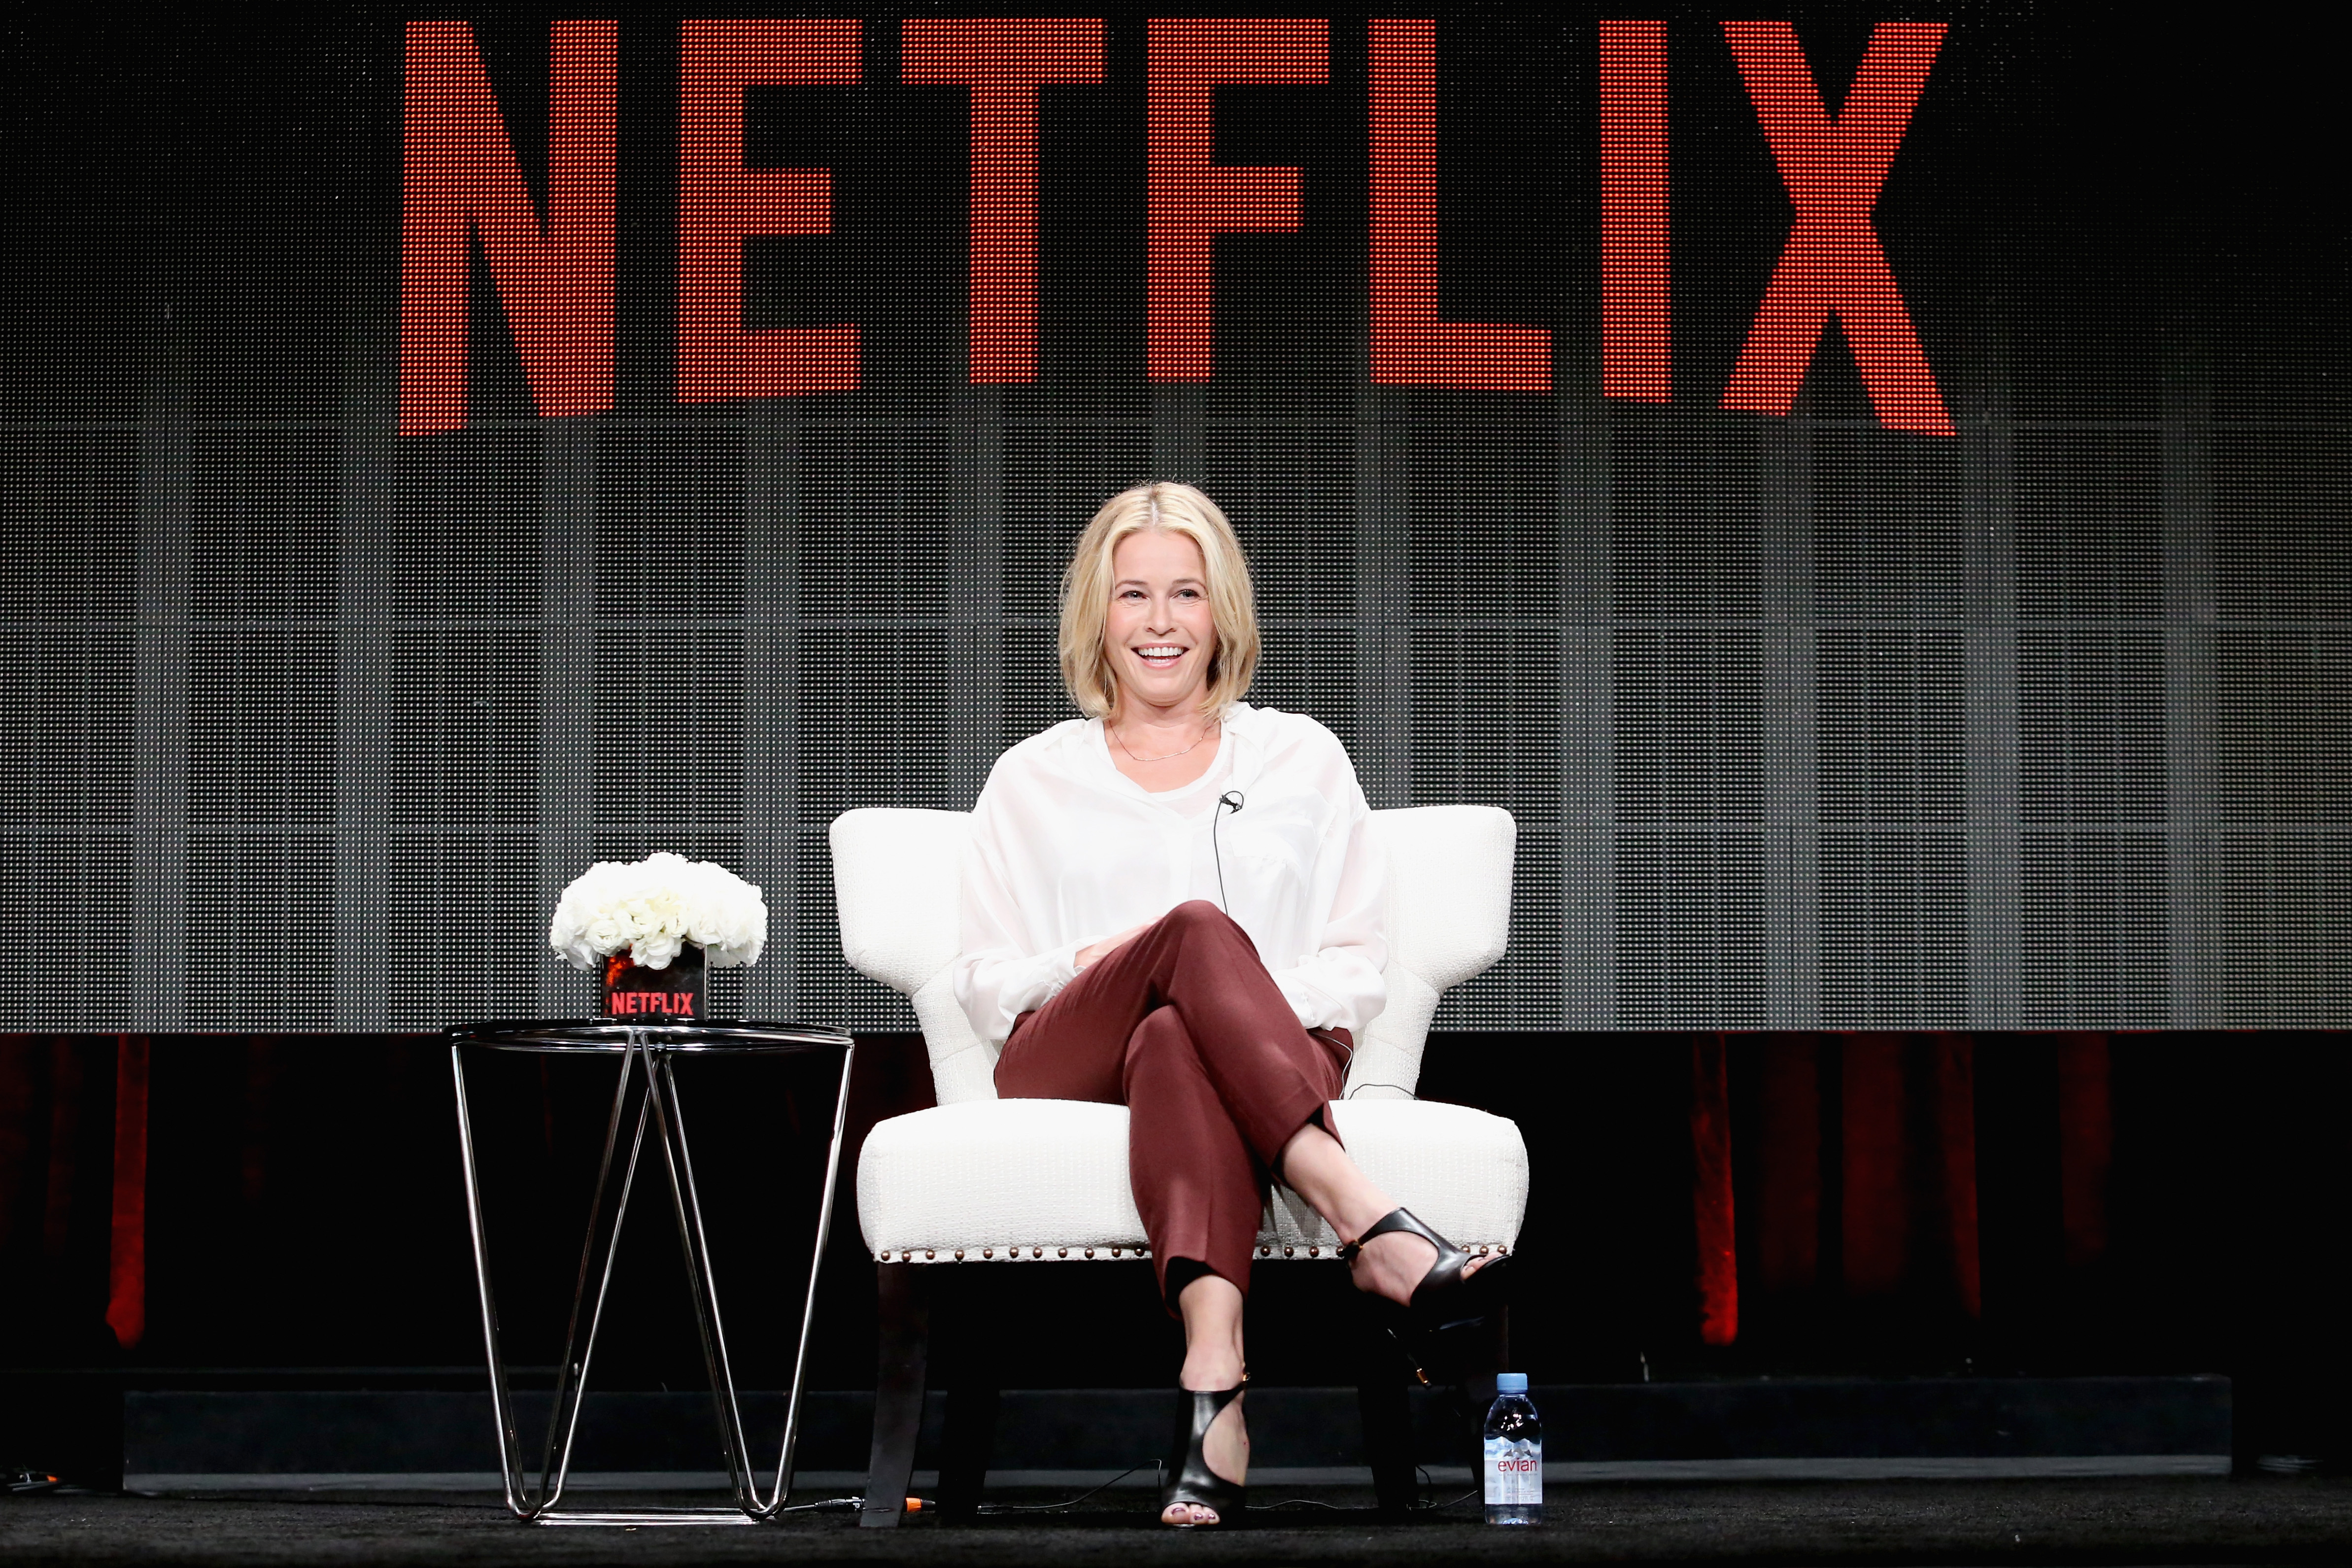 Comedian Chelsea Handler speaks onstage during the "Chelsea Does" panel discussion at the Netflix portion of the 2015  Summer TCA Tour at The Beverly Hilton Hotel on July 28, 2015 in Beverly Hills, California.